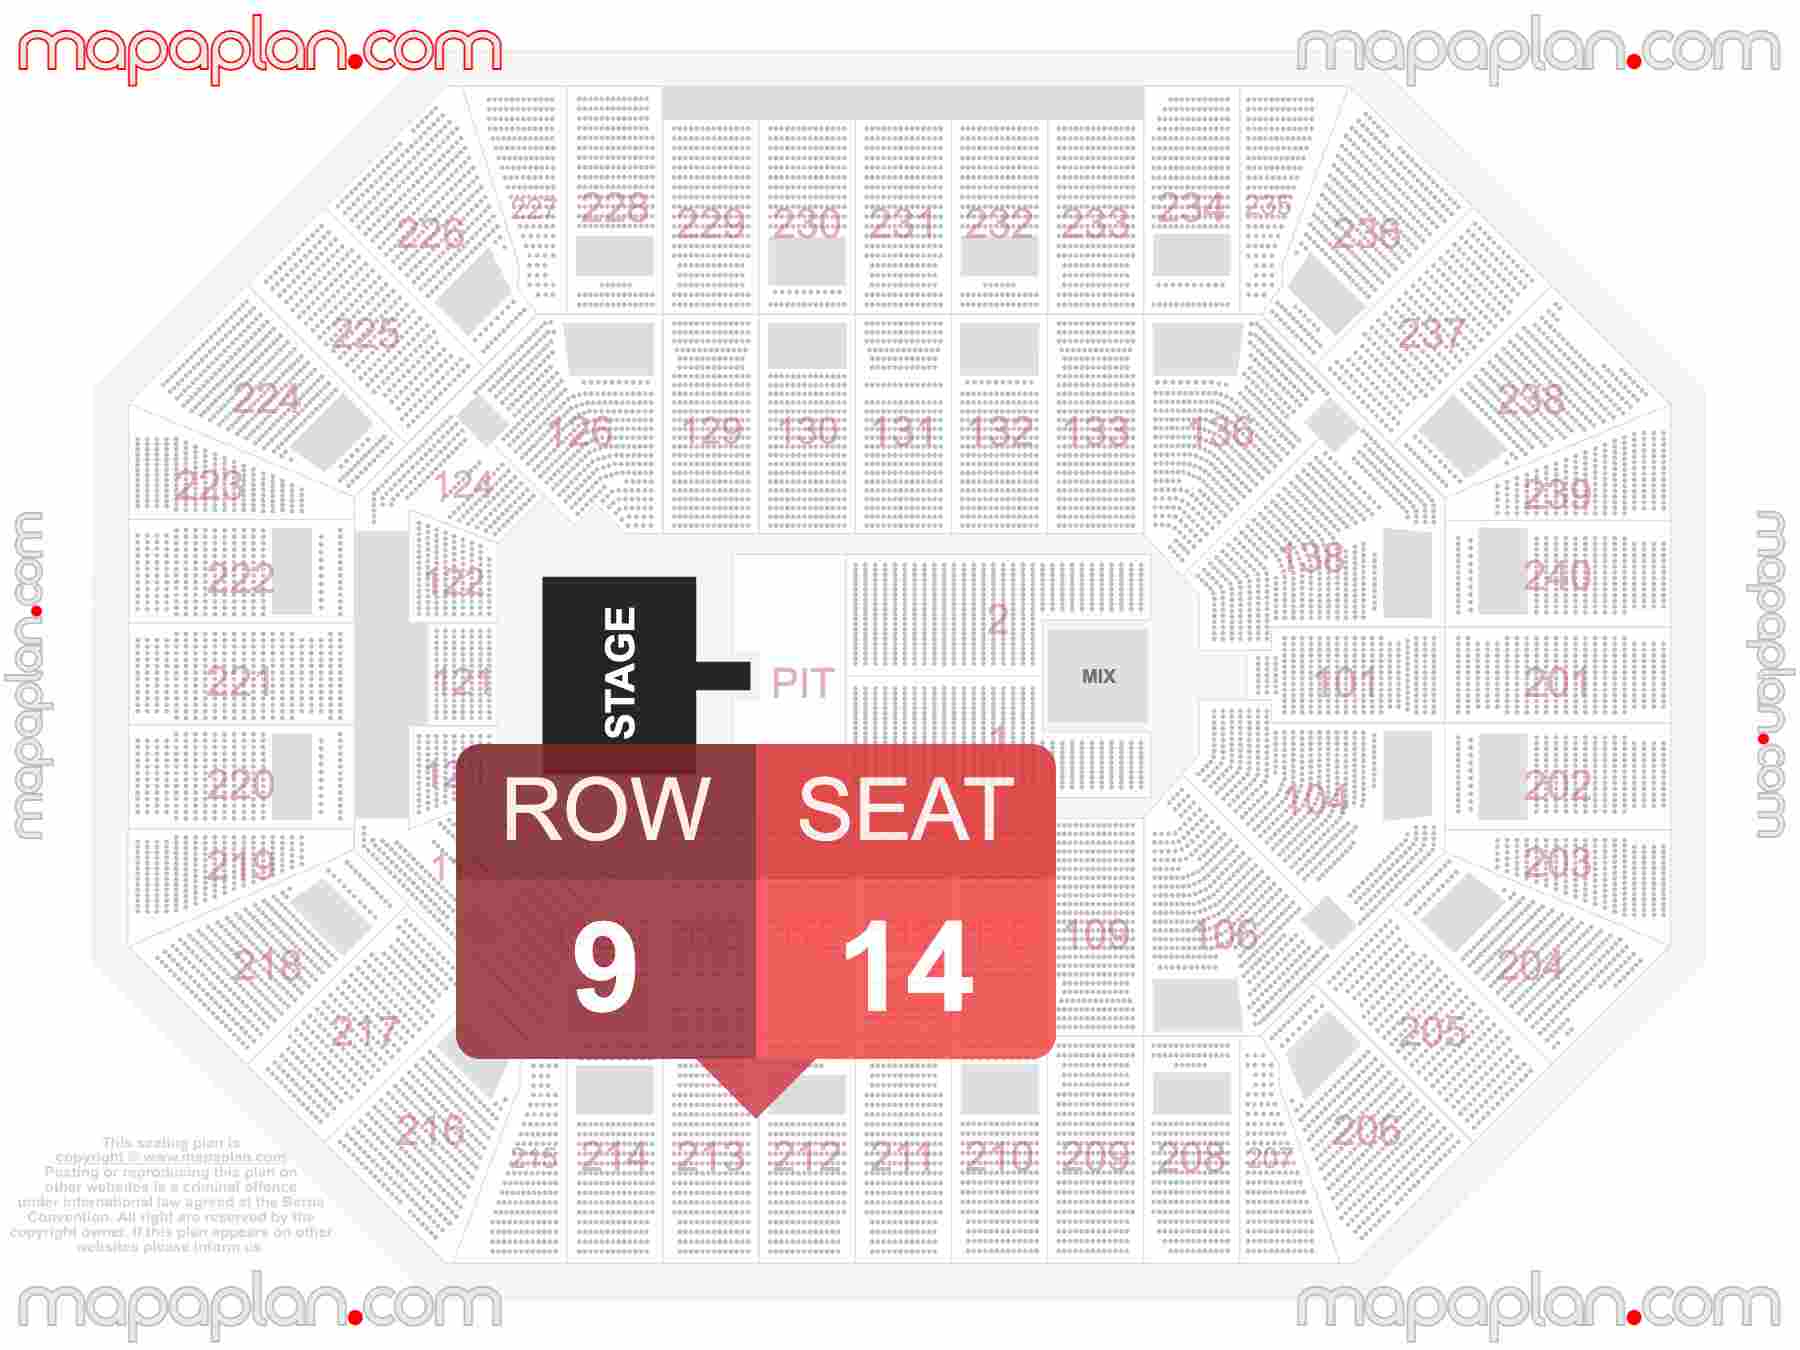 Minneapolis Target Center seating chart Concert with PIT floor standing seating chart with exact section numbers showing best rows and seats selection 3d layout - Best interactive seat finder tool with precise detailed location data